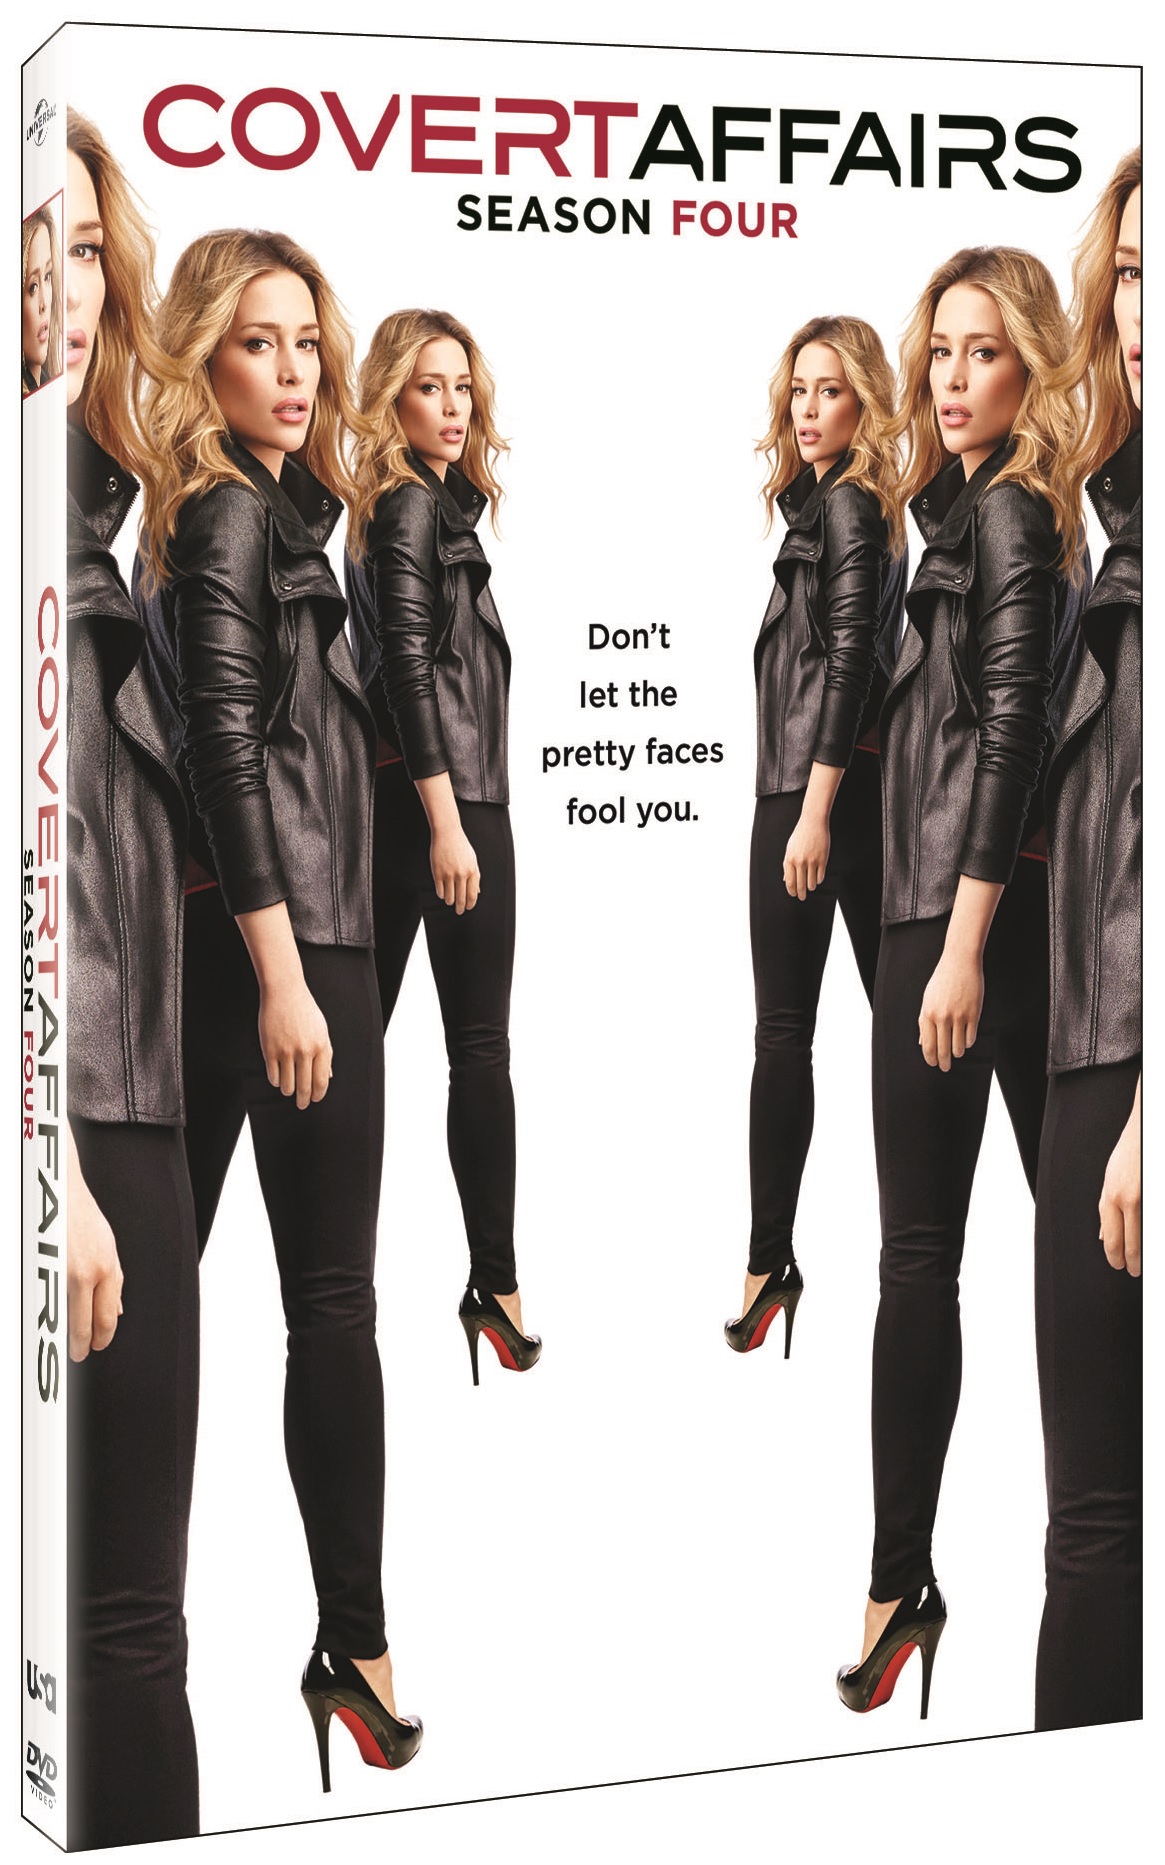 Covert Affairs Seaon 4 DVD Review